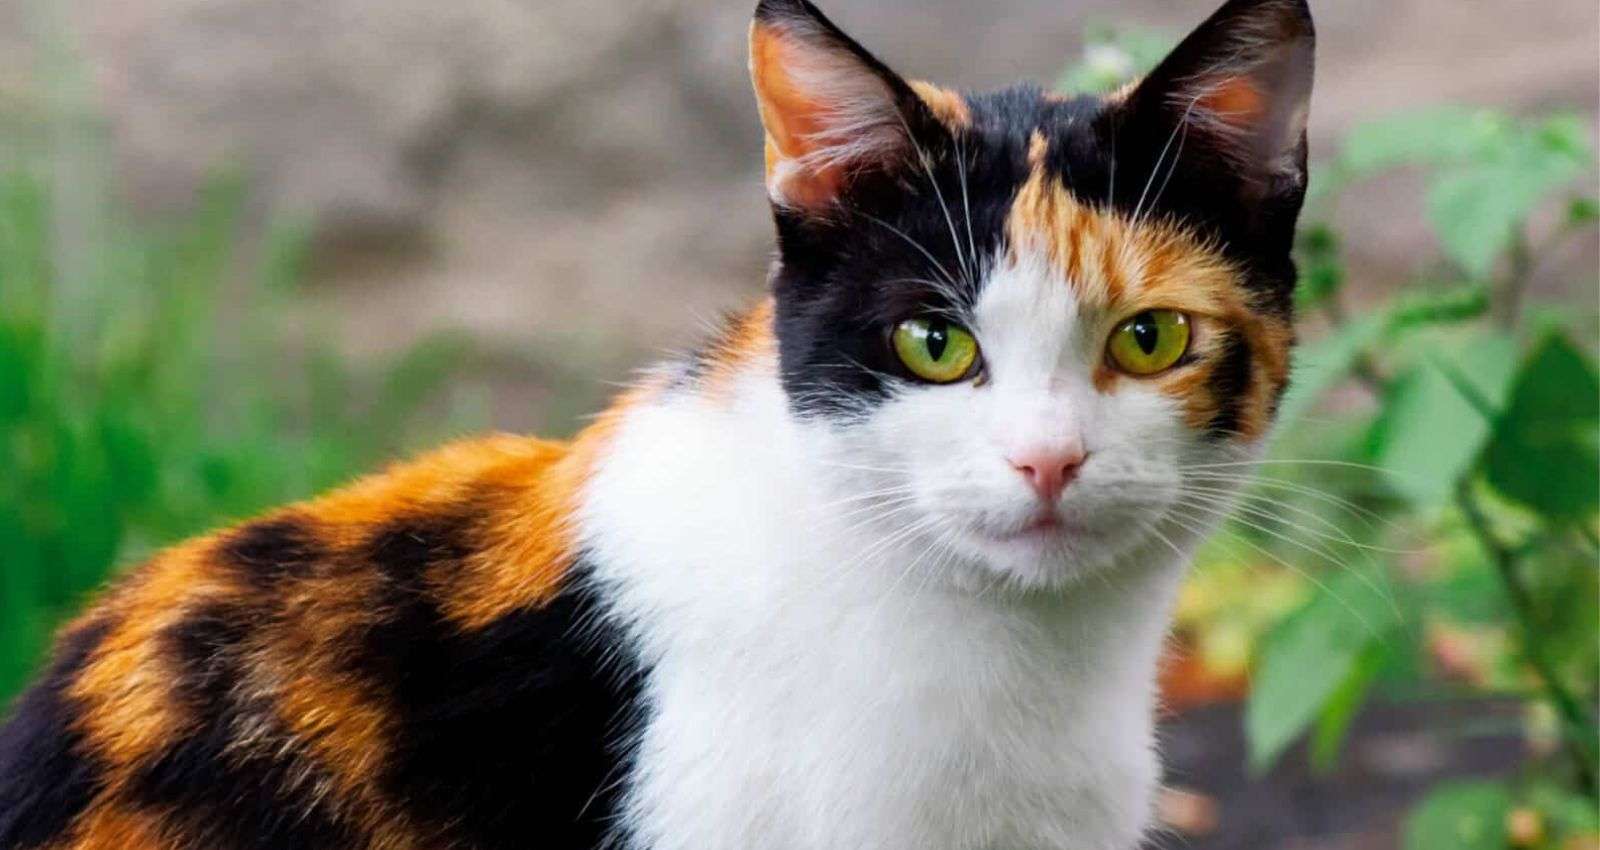 How much are male calico cats worth?